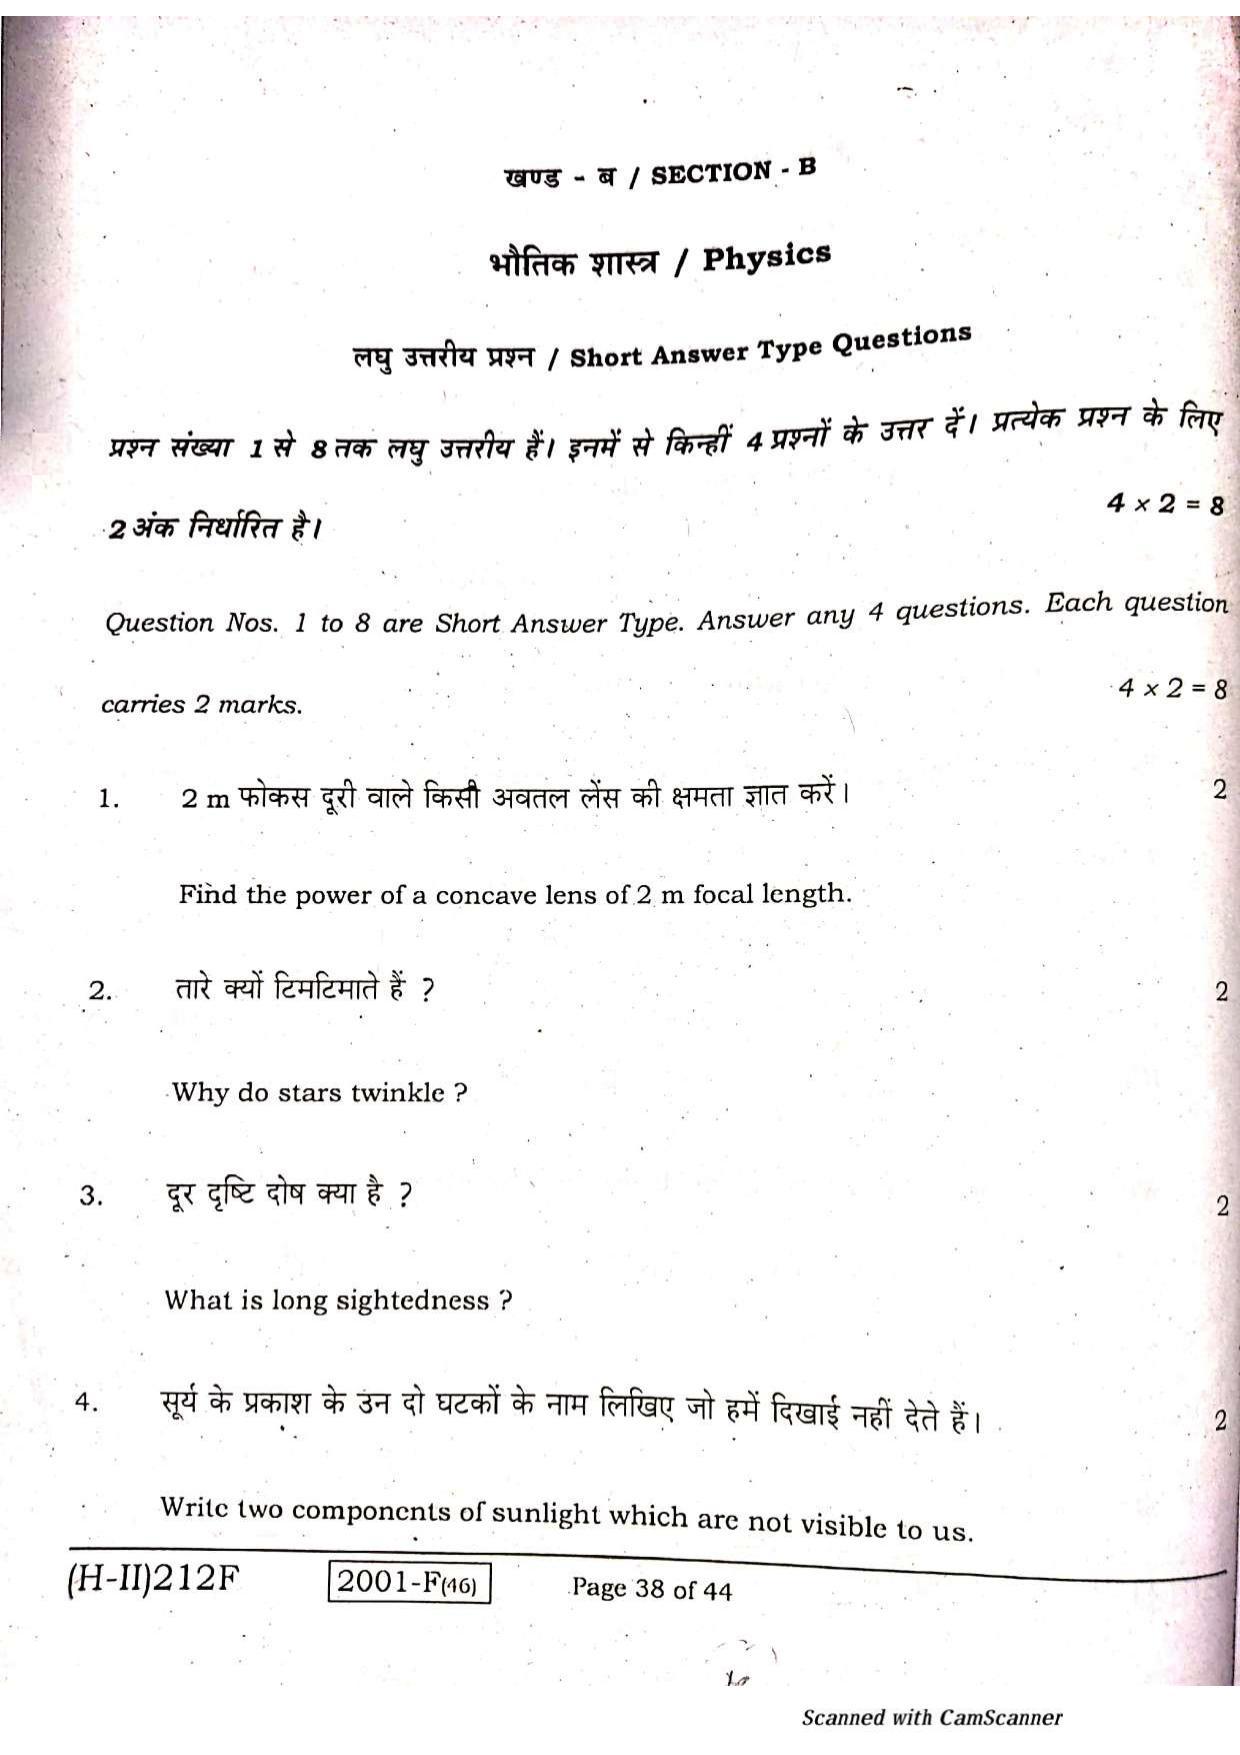 Bihar Board Class 10 Science 2021 (2nd Sitting) Question Paper - Page 36